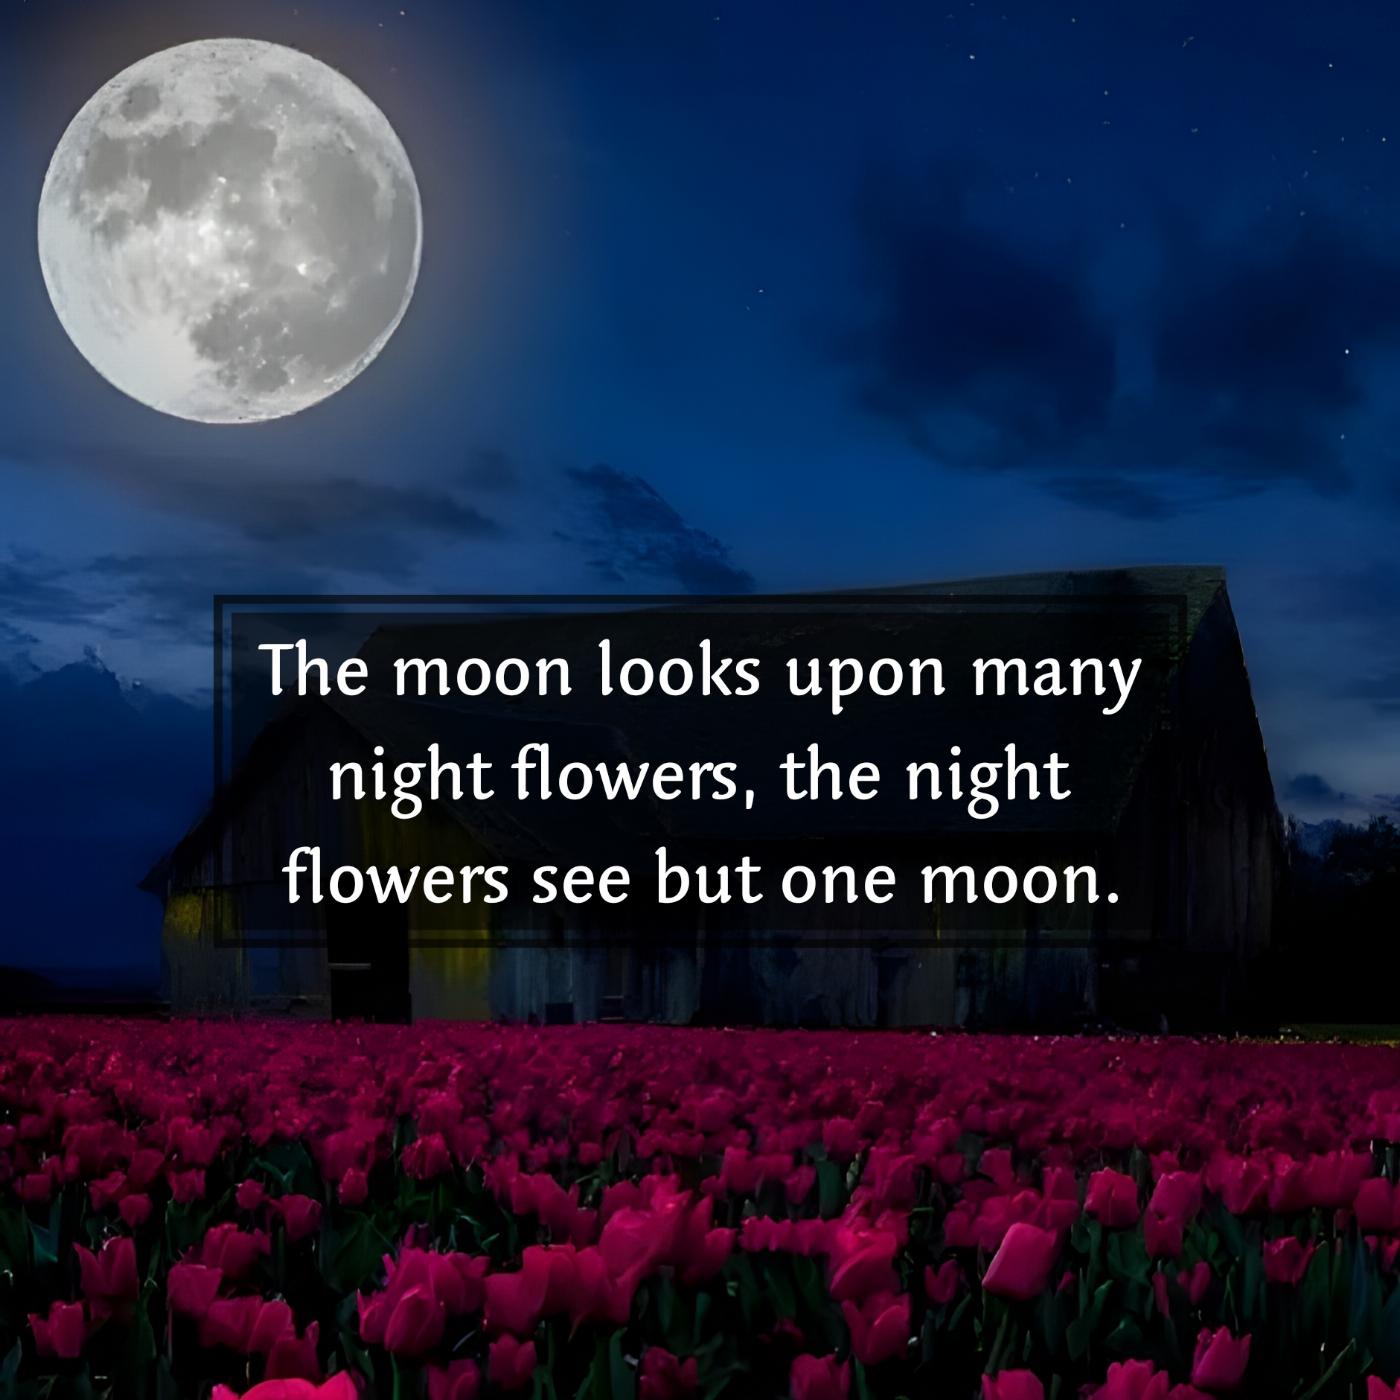 The moon looks upon many night flowers